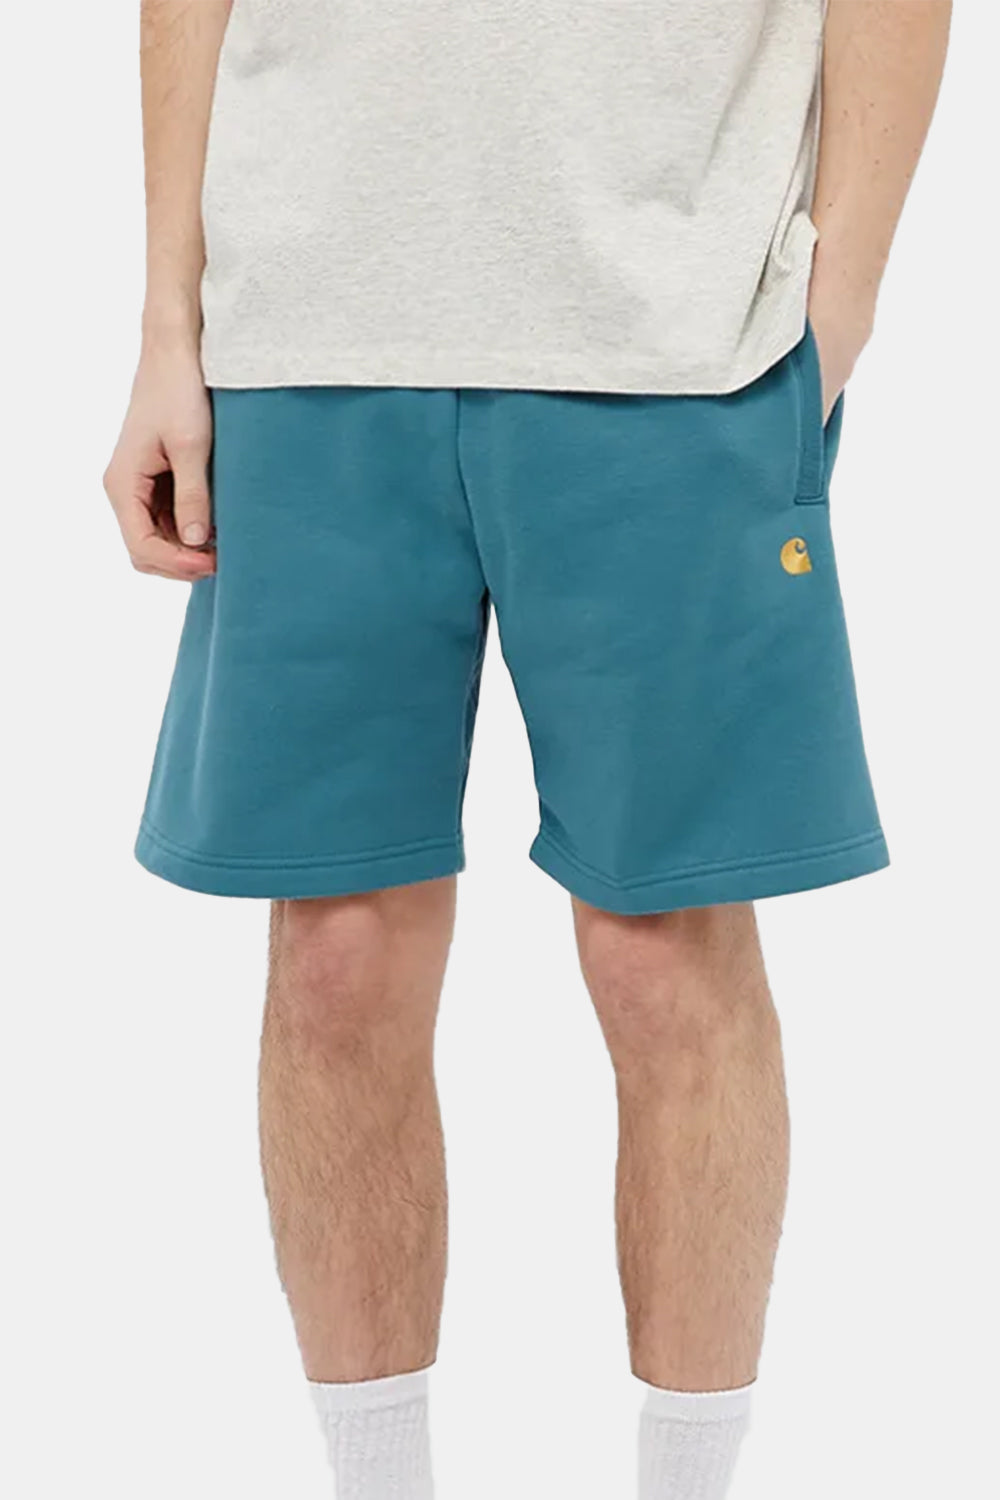 Carhartt WIP Chase Sweat Shorts (Hydro & Gold) | Number Six